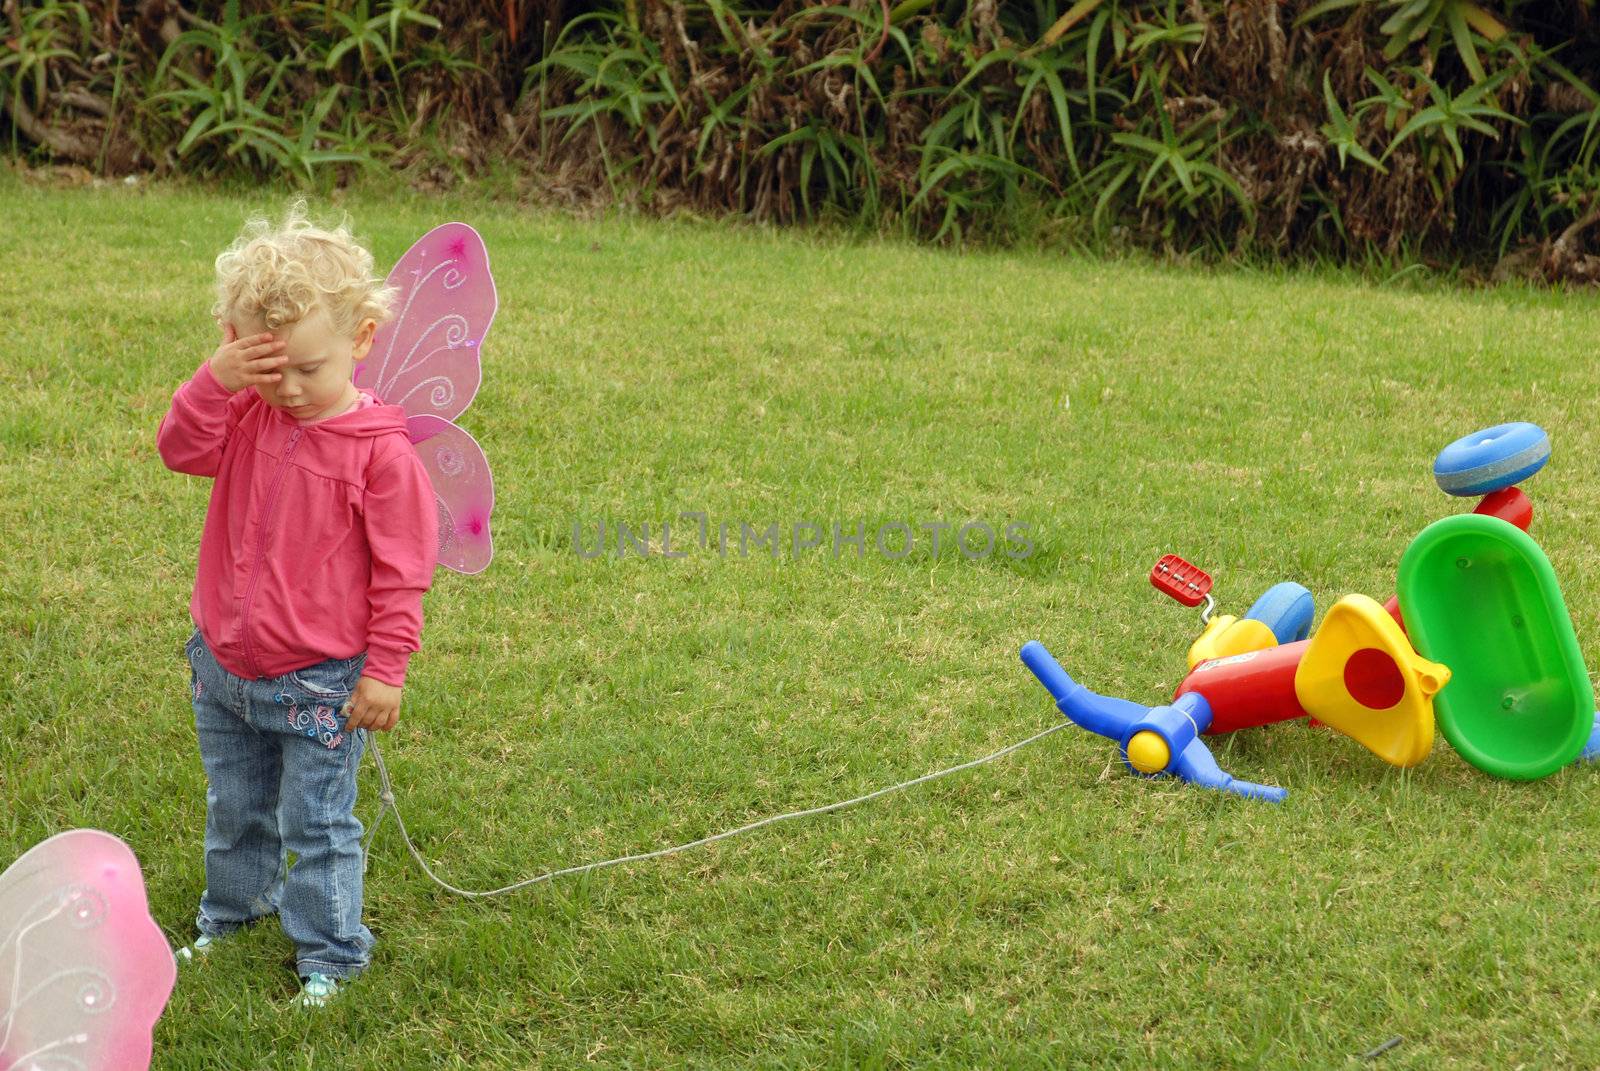 Blondie little girl with short curly hair on butterfly wings costume playing pretending sadness with tricycle on the grass in the park.